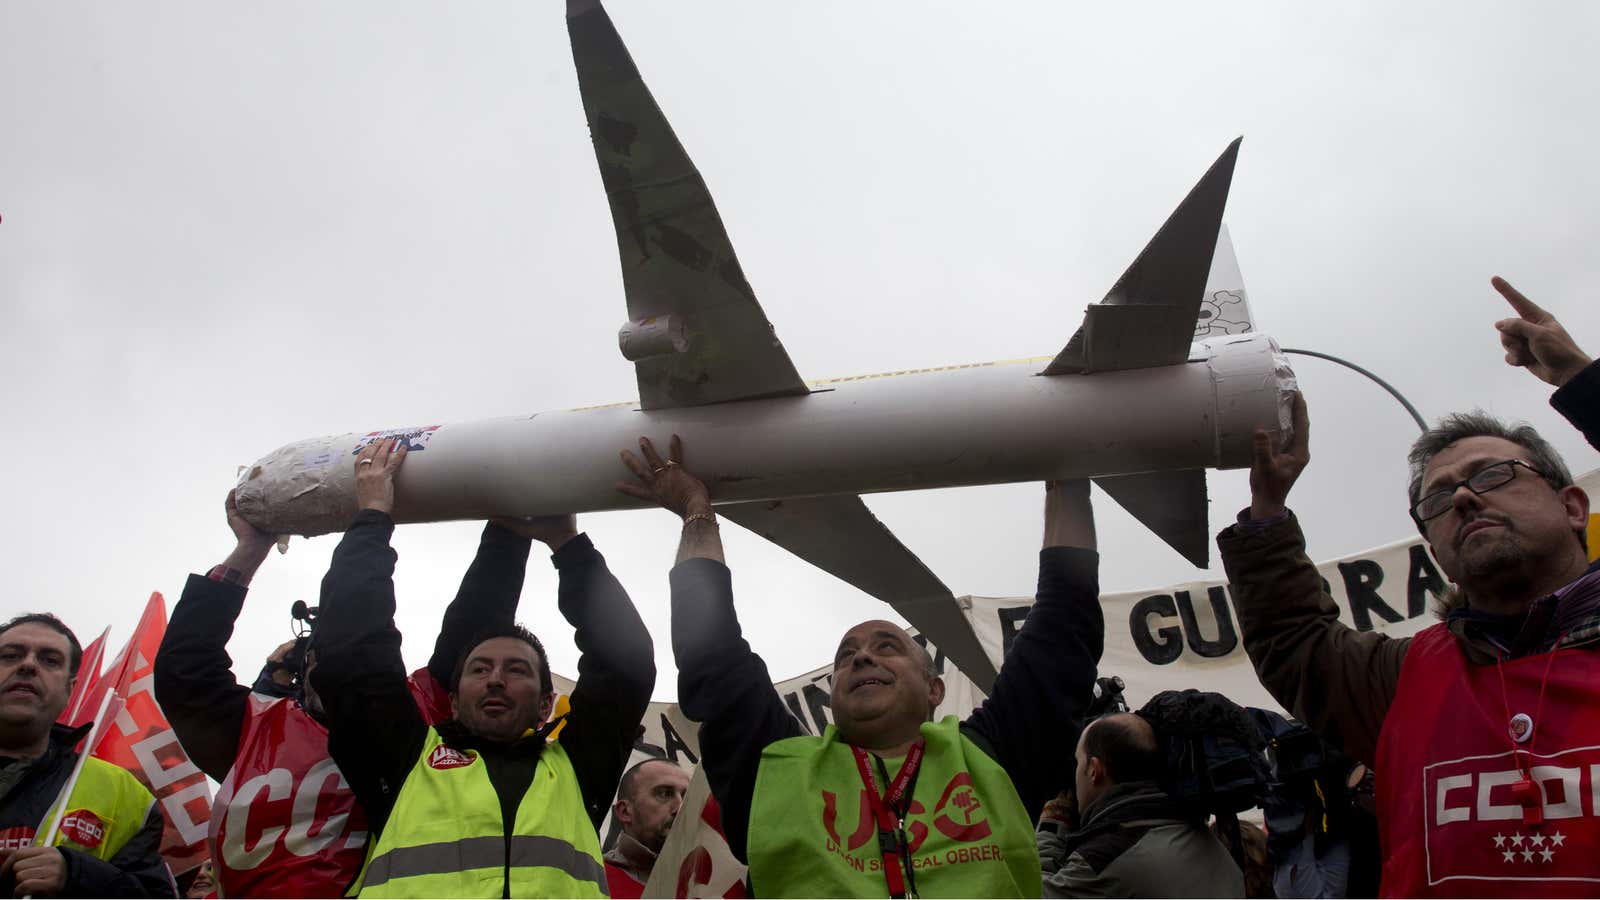 Iberia workers carry a model plane as they protest outside Barajas international airport in Madrid, Spain, Monday Feb. 18, 2013. Protesters clashed with police at…